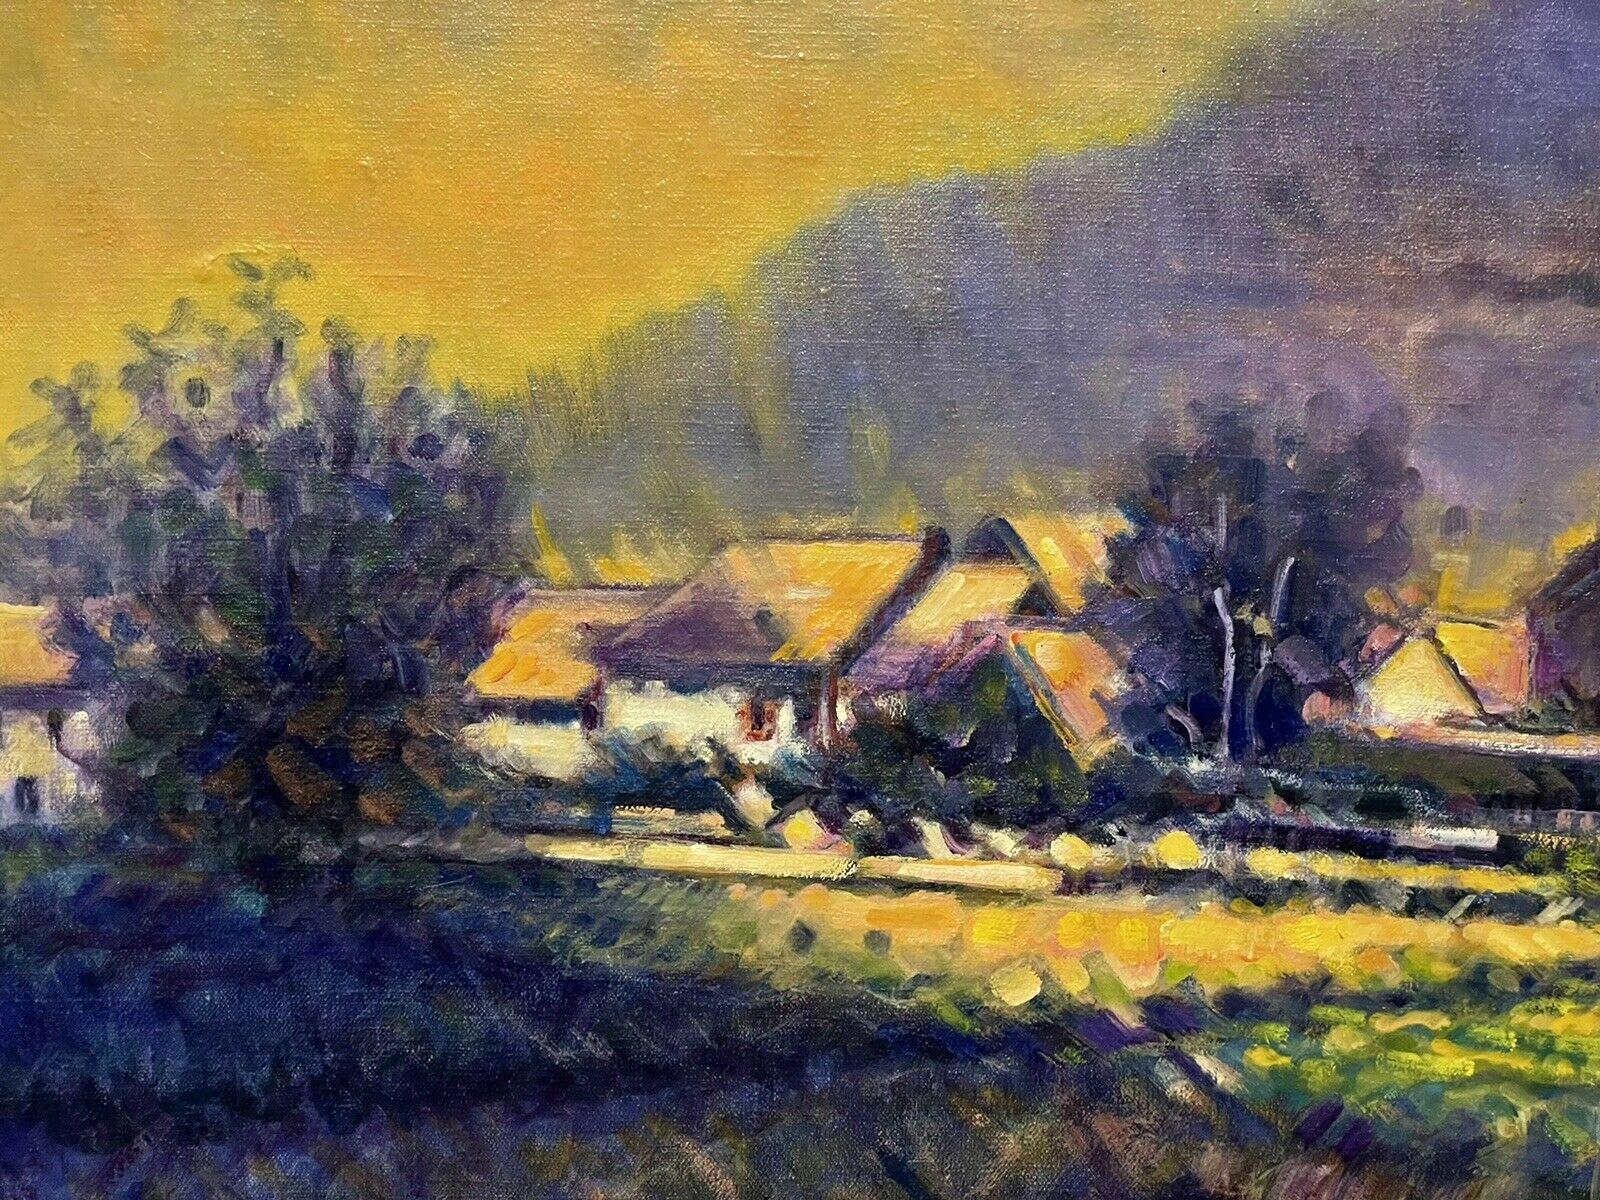 Artist/ School: French Post-Impressionist School, signed to the front and back. 

Title: Provence Landscape

Medium: signed oil painting on canvas, framed

framed: 25.25 29.25 inches
canvas: 21.5 x 25.75 inches

Provenance: private collection,